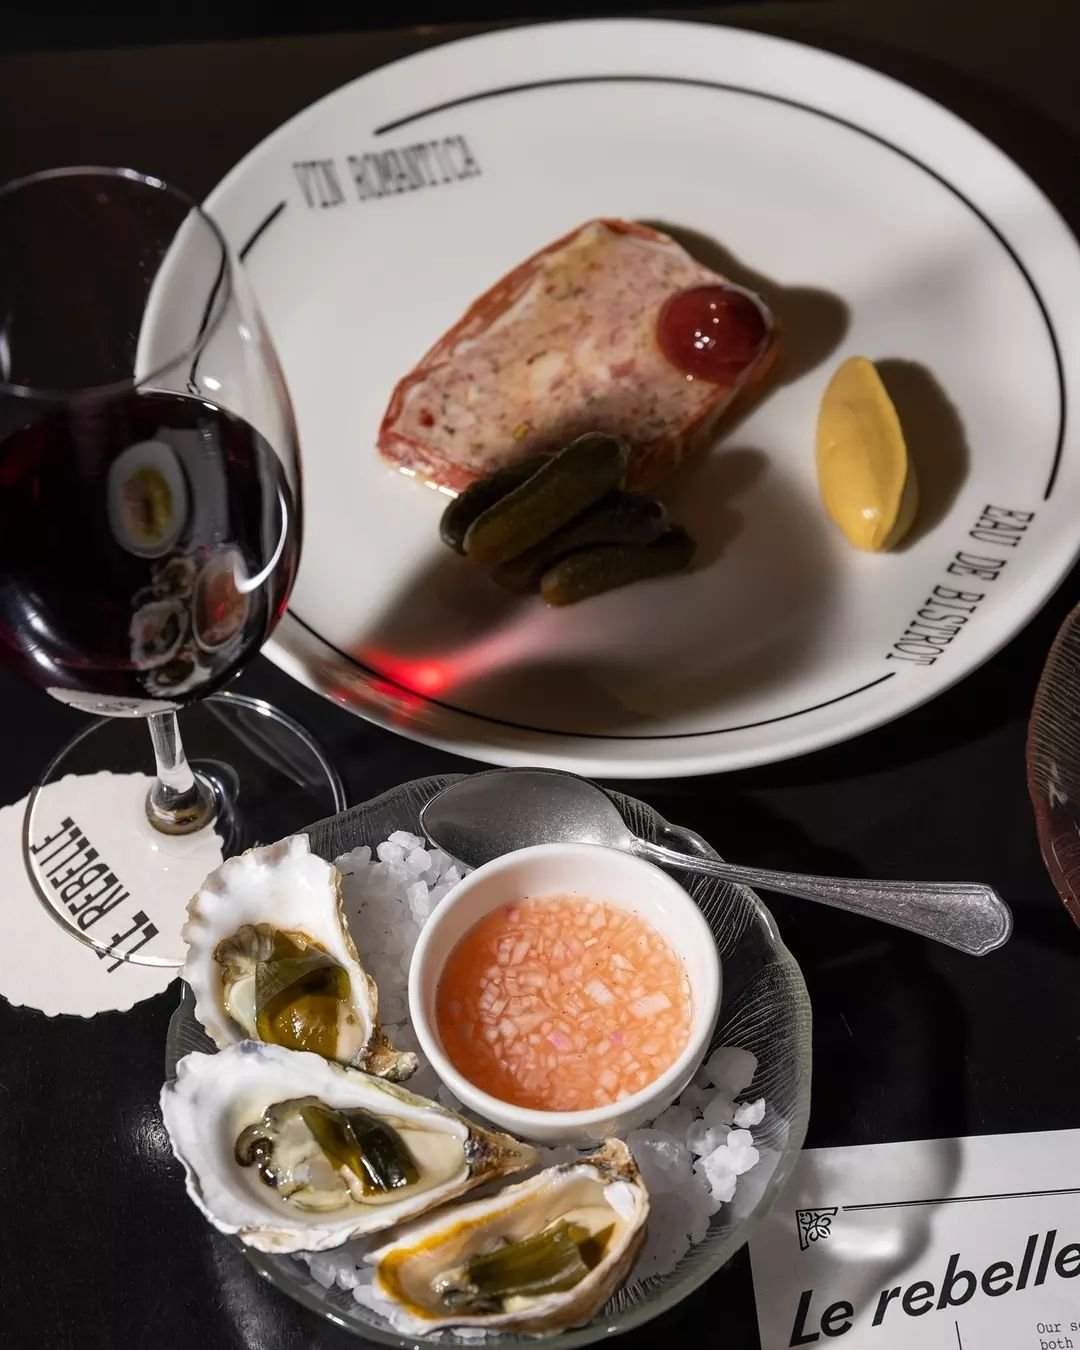 Oysters. Terrine. A perfect way to start a meal.